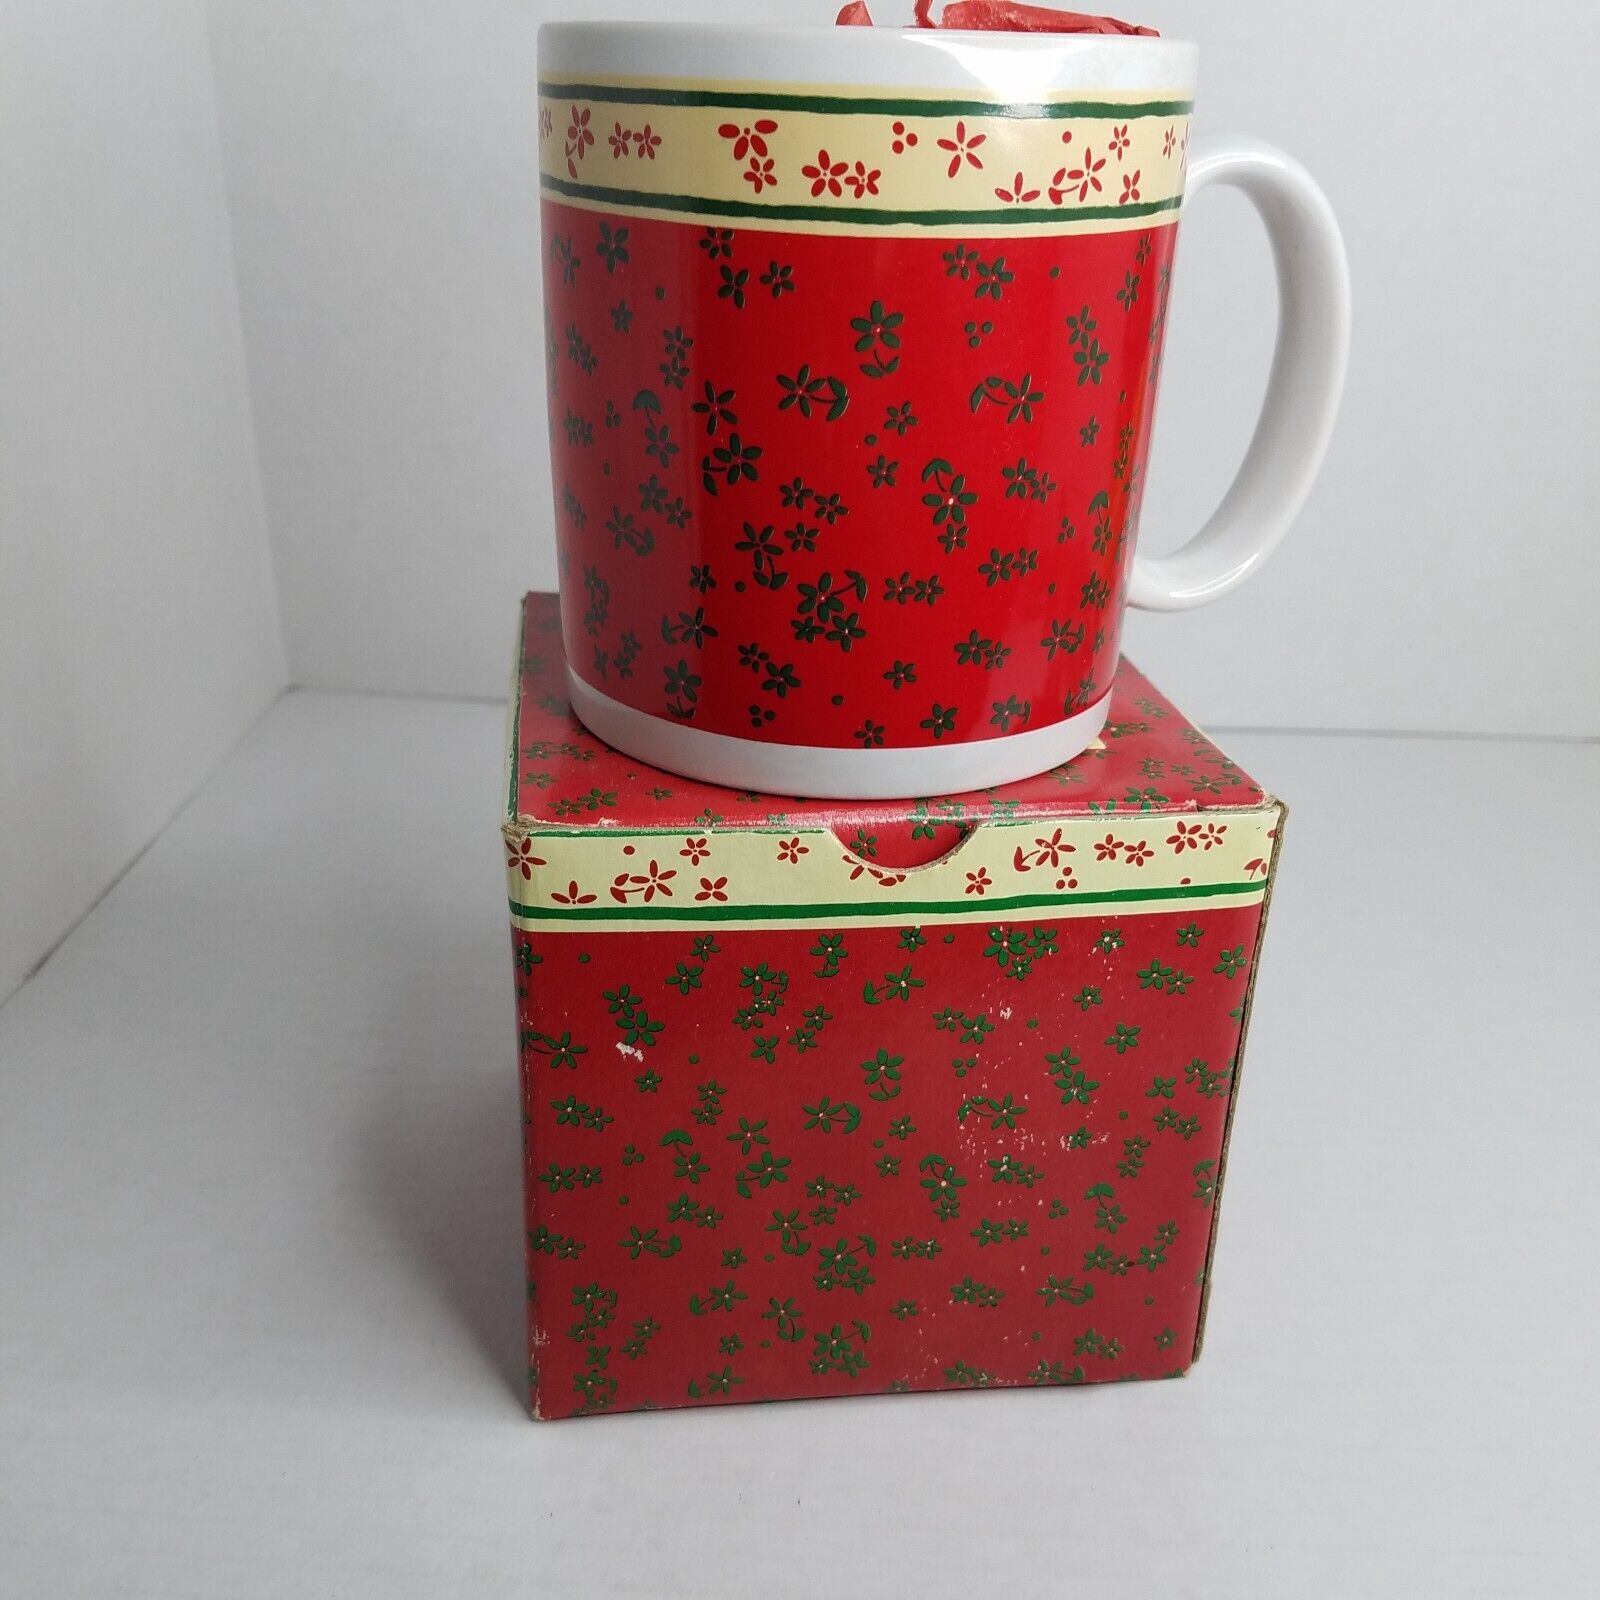 NEW VINTAGE 1980s RUSS Berry Christmas Mug Coffee Tea Cup Red Green Floral